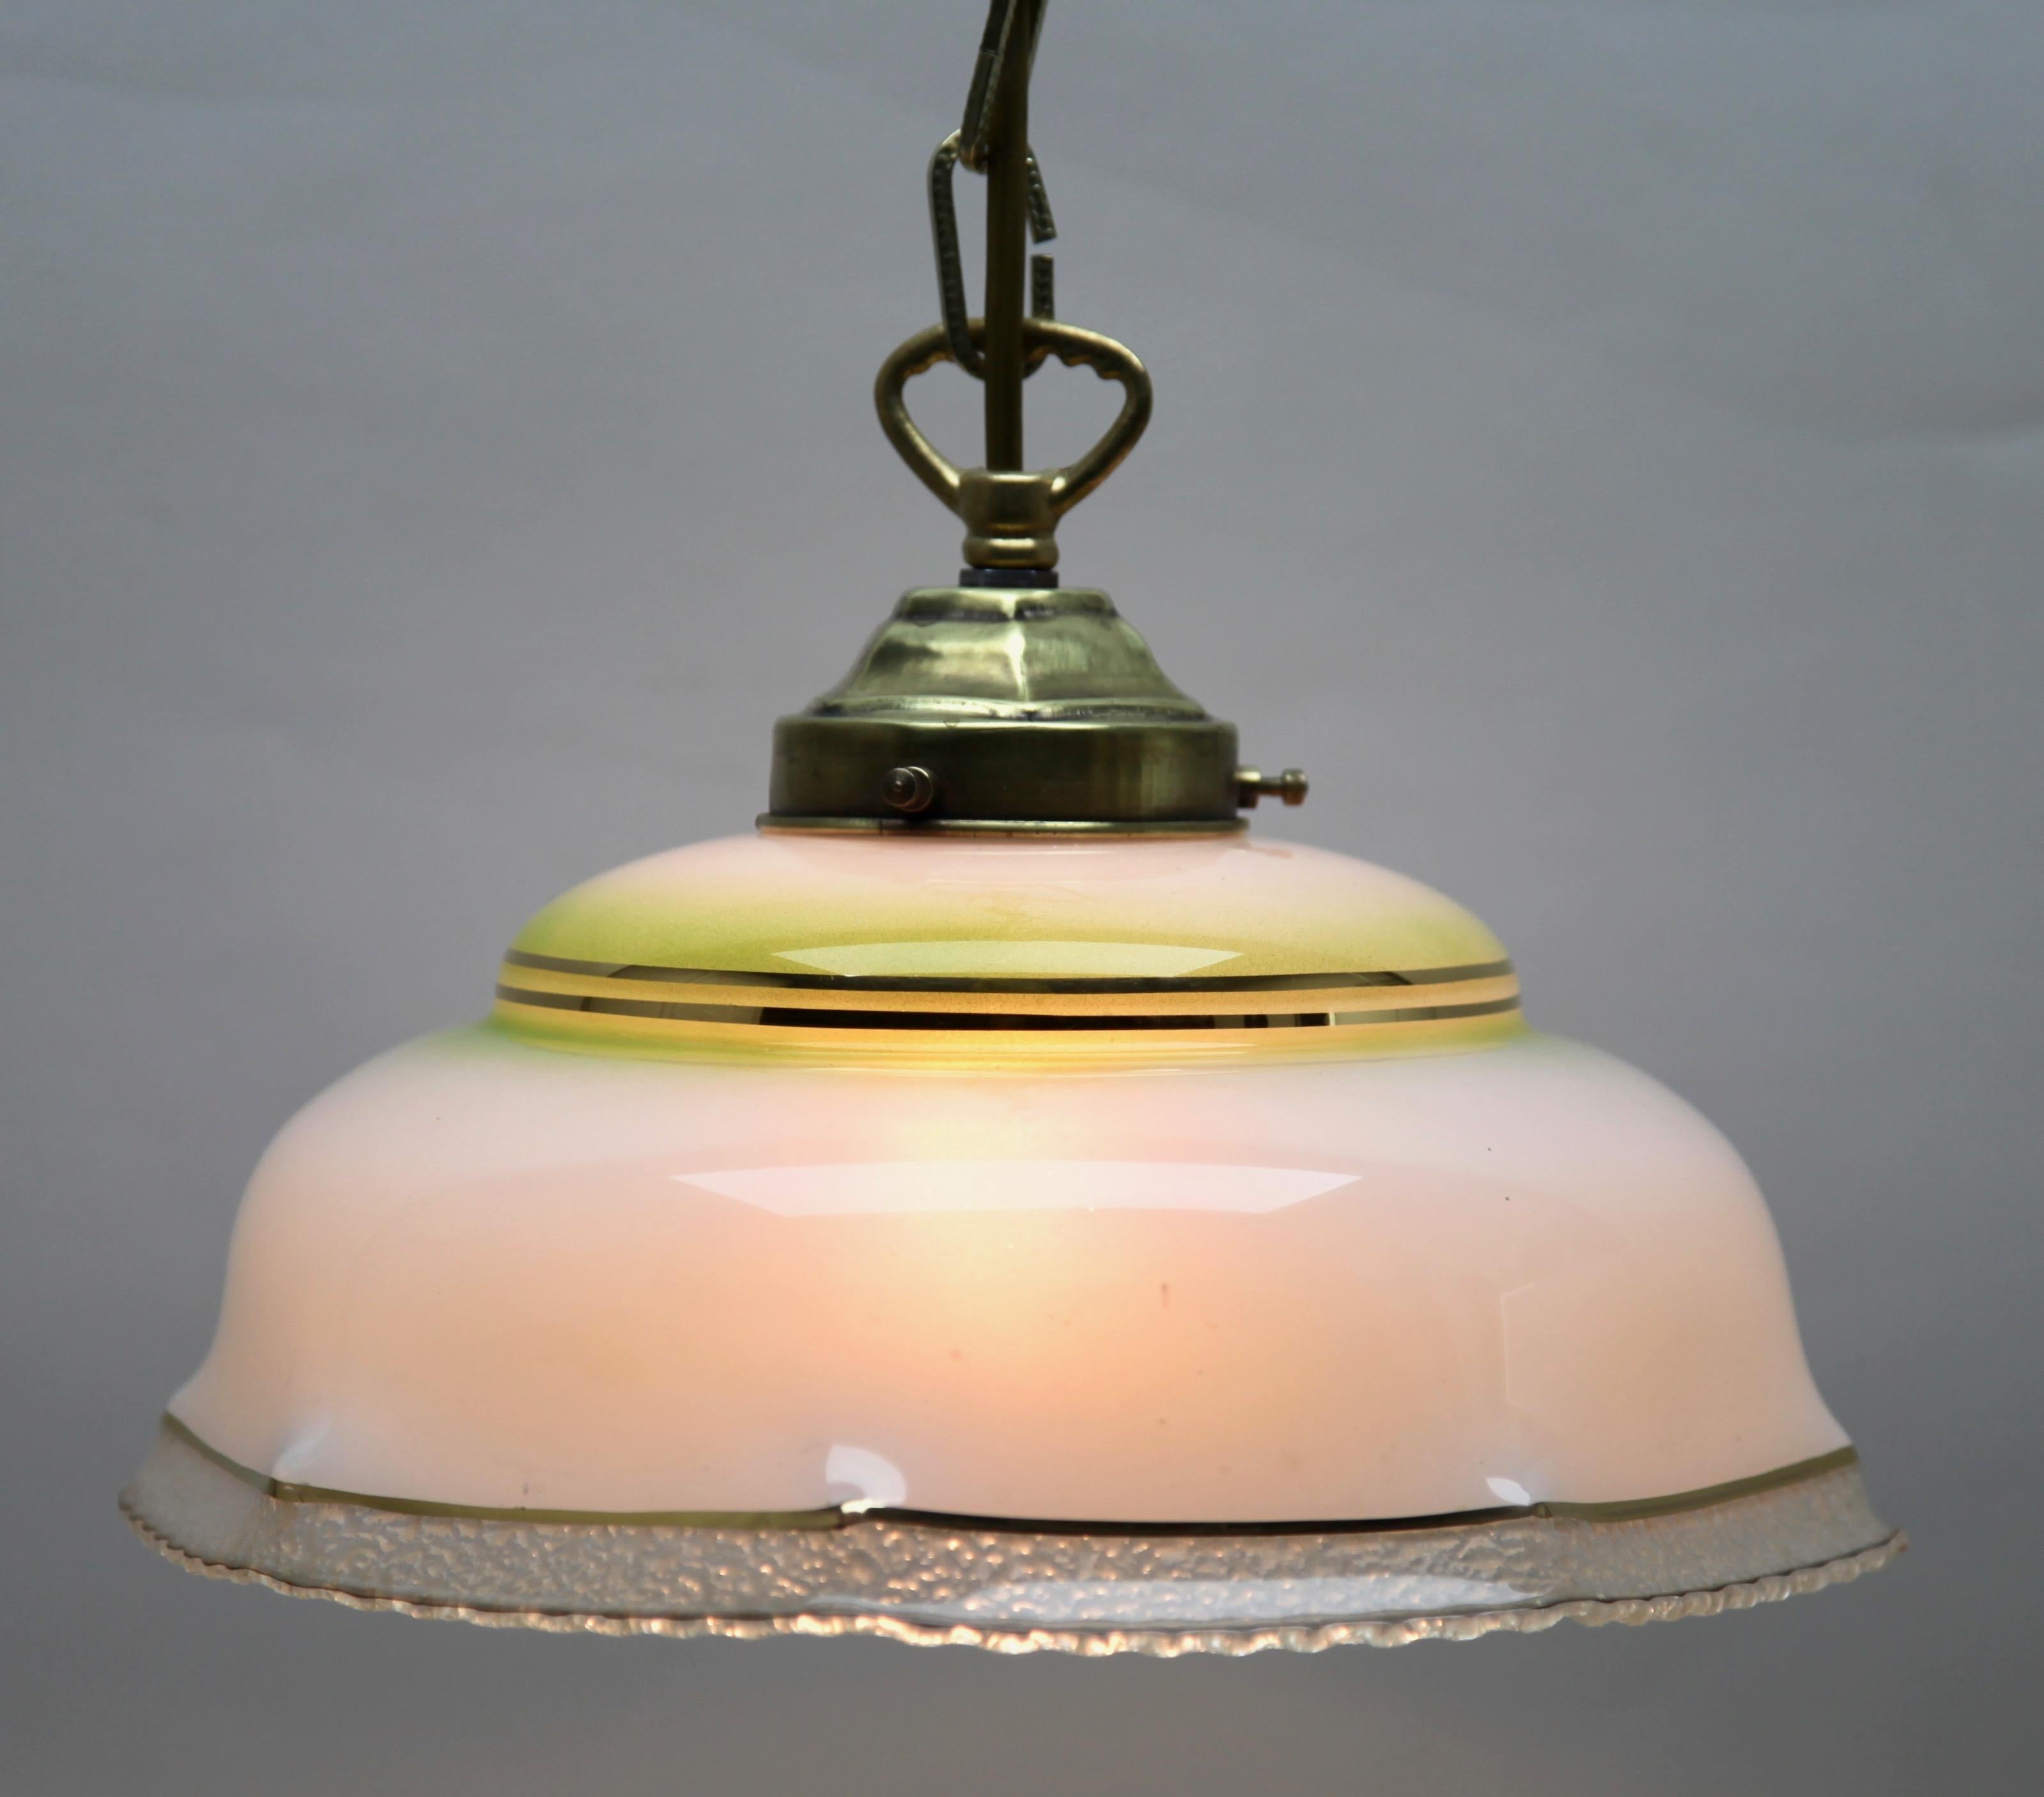 Art Nouveau ceiling lamp

Photography fails to capture the simple elegant illumination provided by this lamp.

Fitting messing pendant ceiling light with screw fixing to hold a stylish Belgian Art Deco lampshade. 
Good distribution of darker and